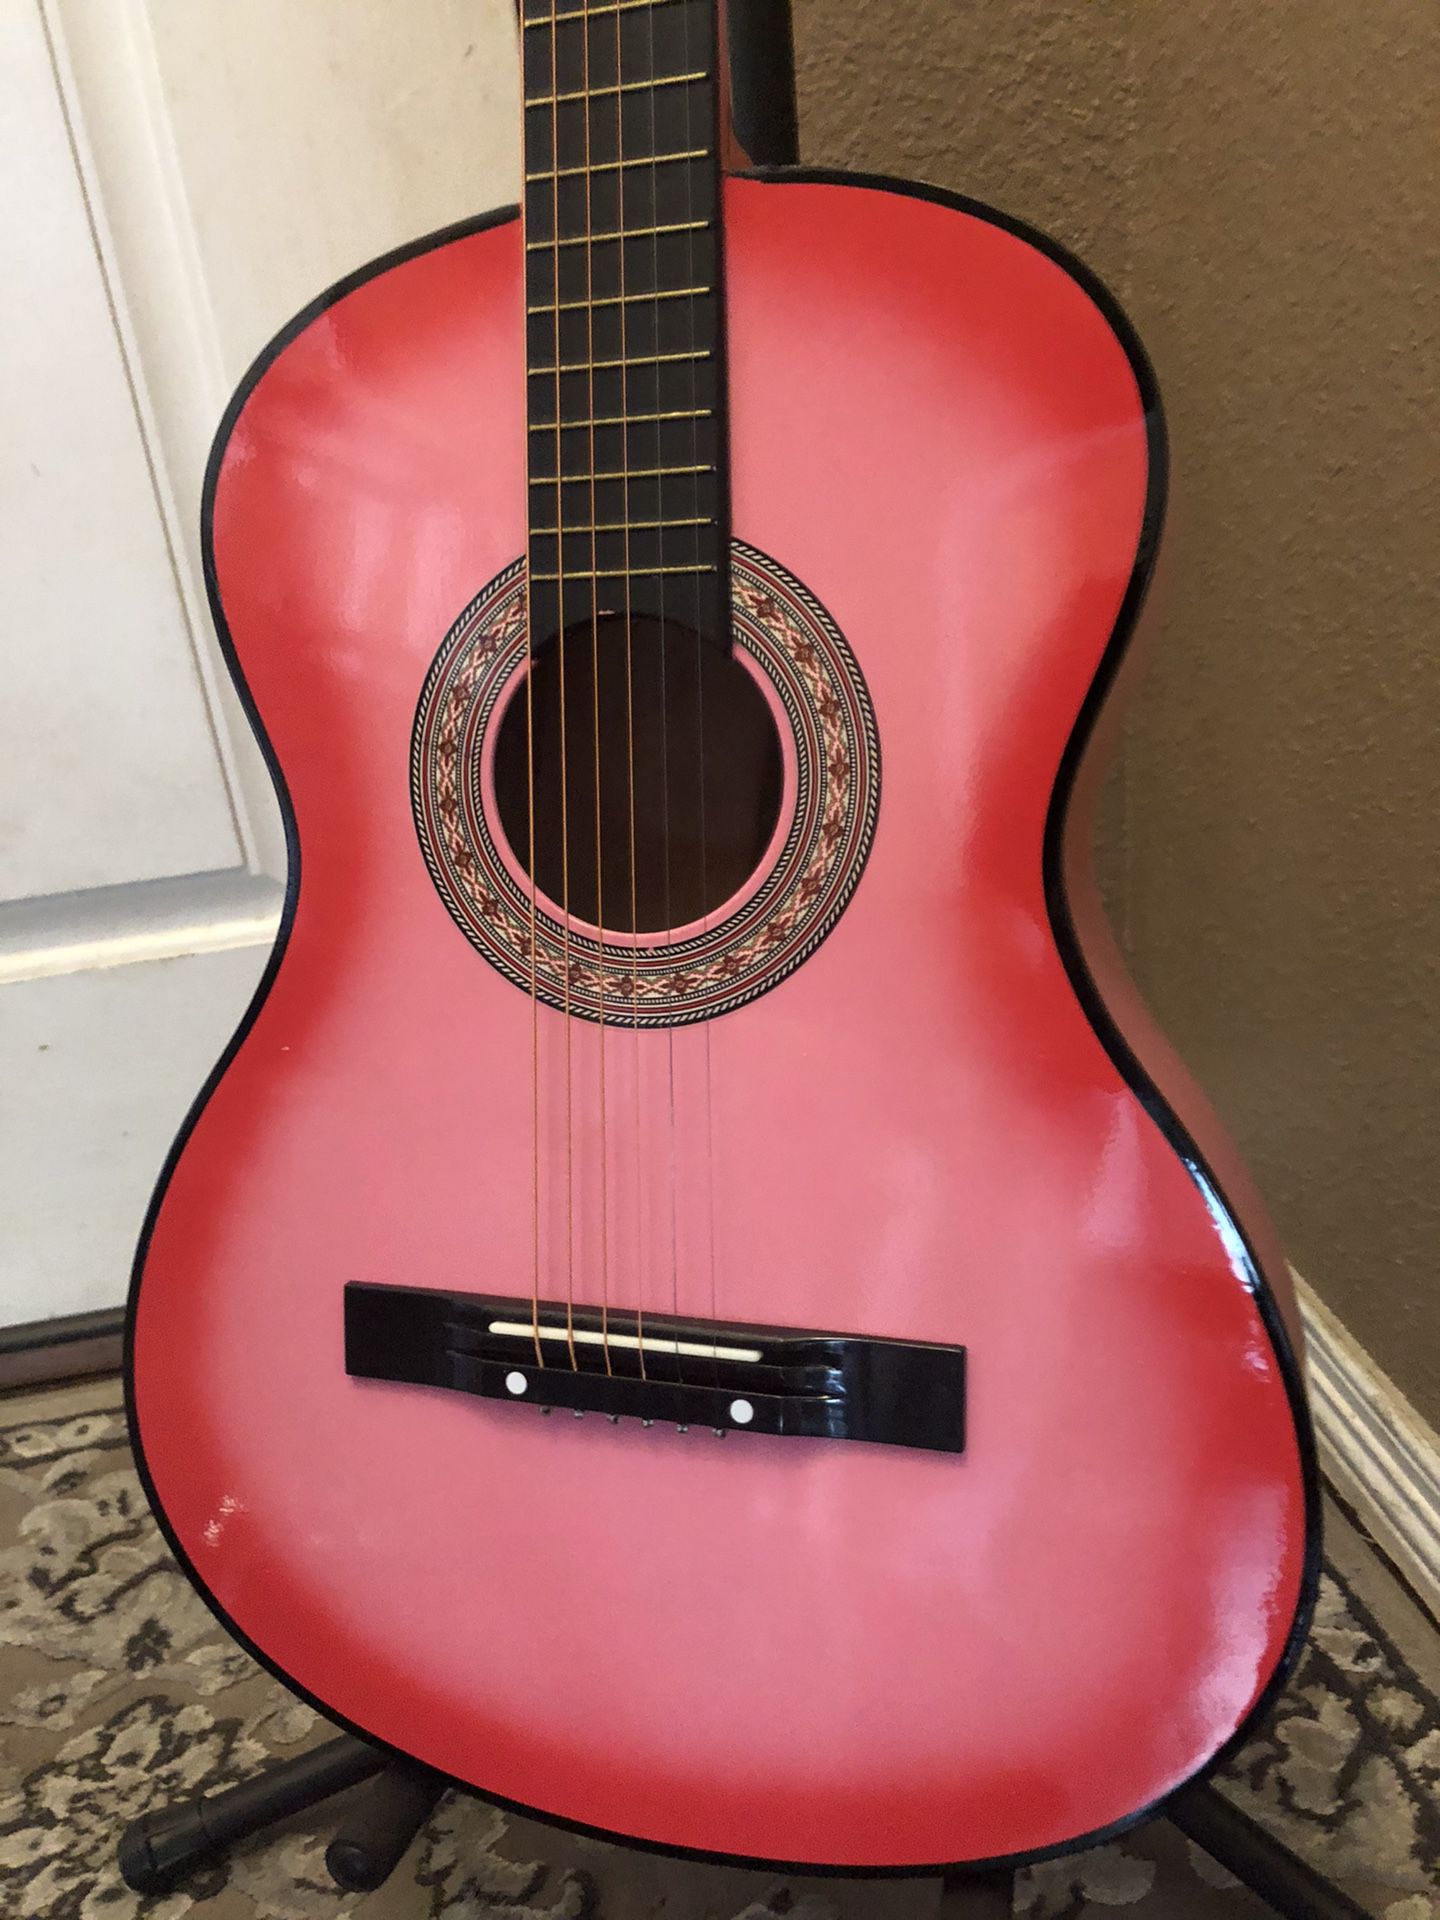 7/8 Size Pink Acoustic Guitar with Extra Strings, Cover, Pick, Strap $75 Firm